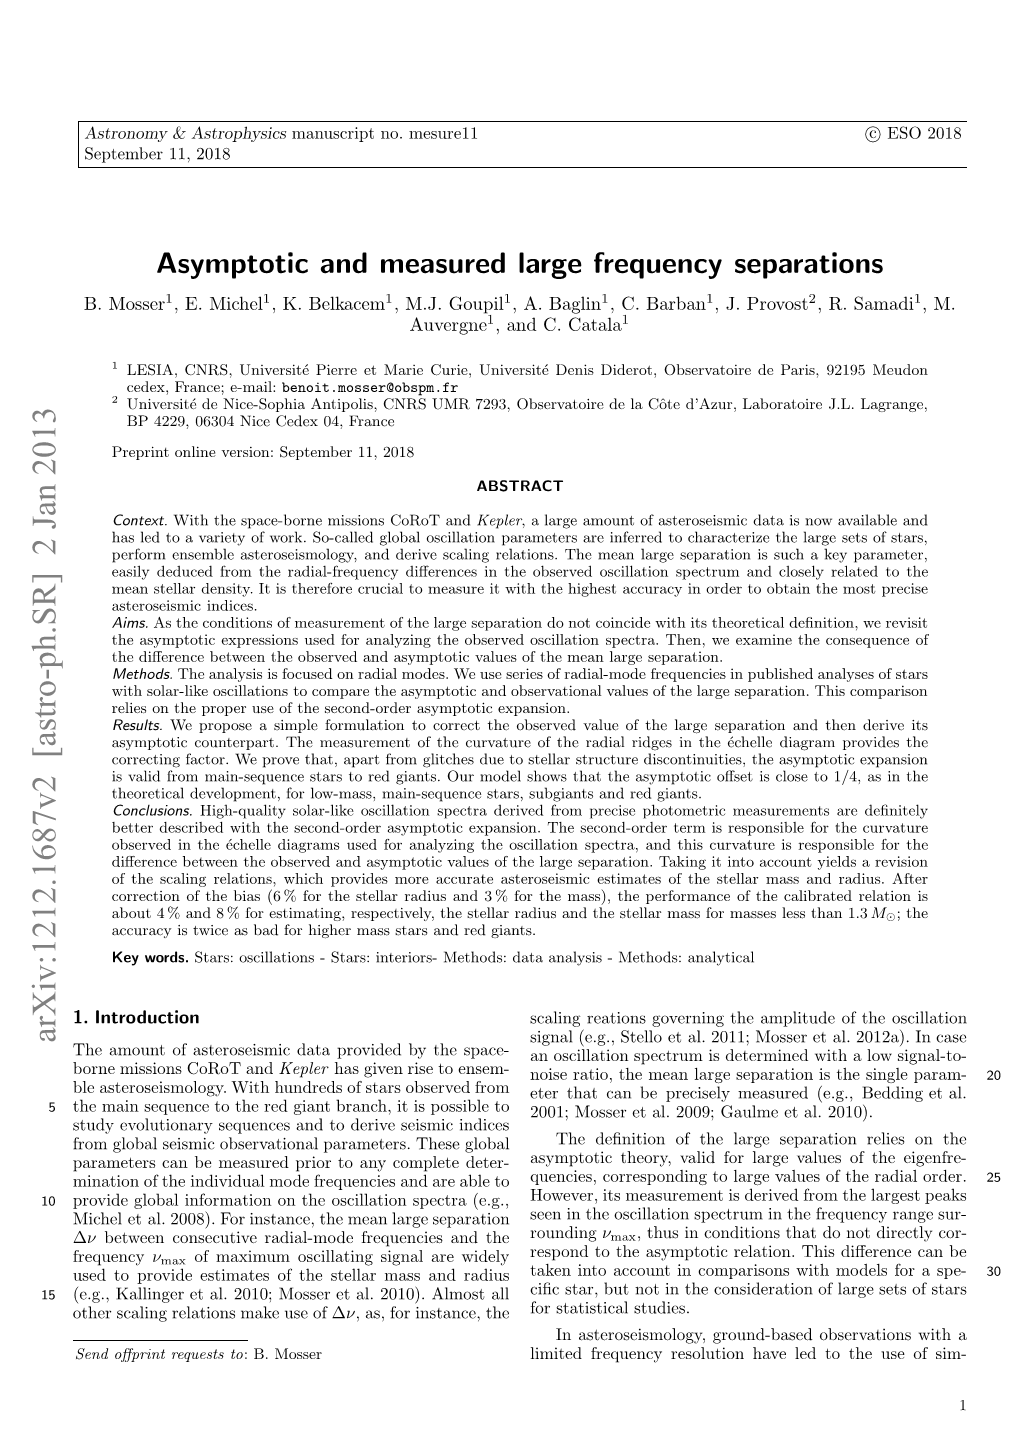 Asymptotic and Measured Large Frequency Separations